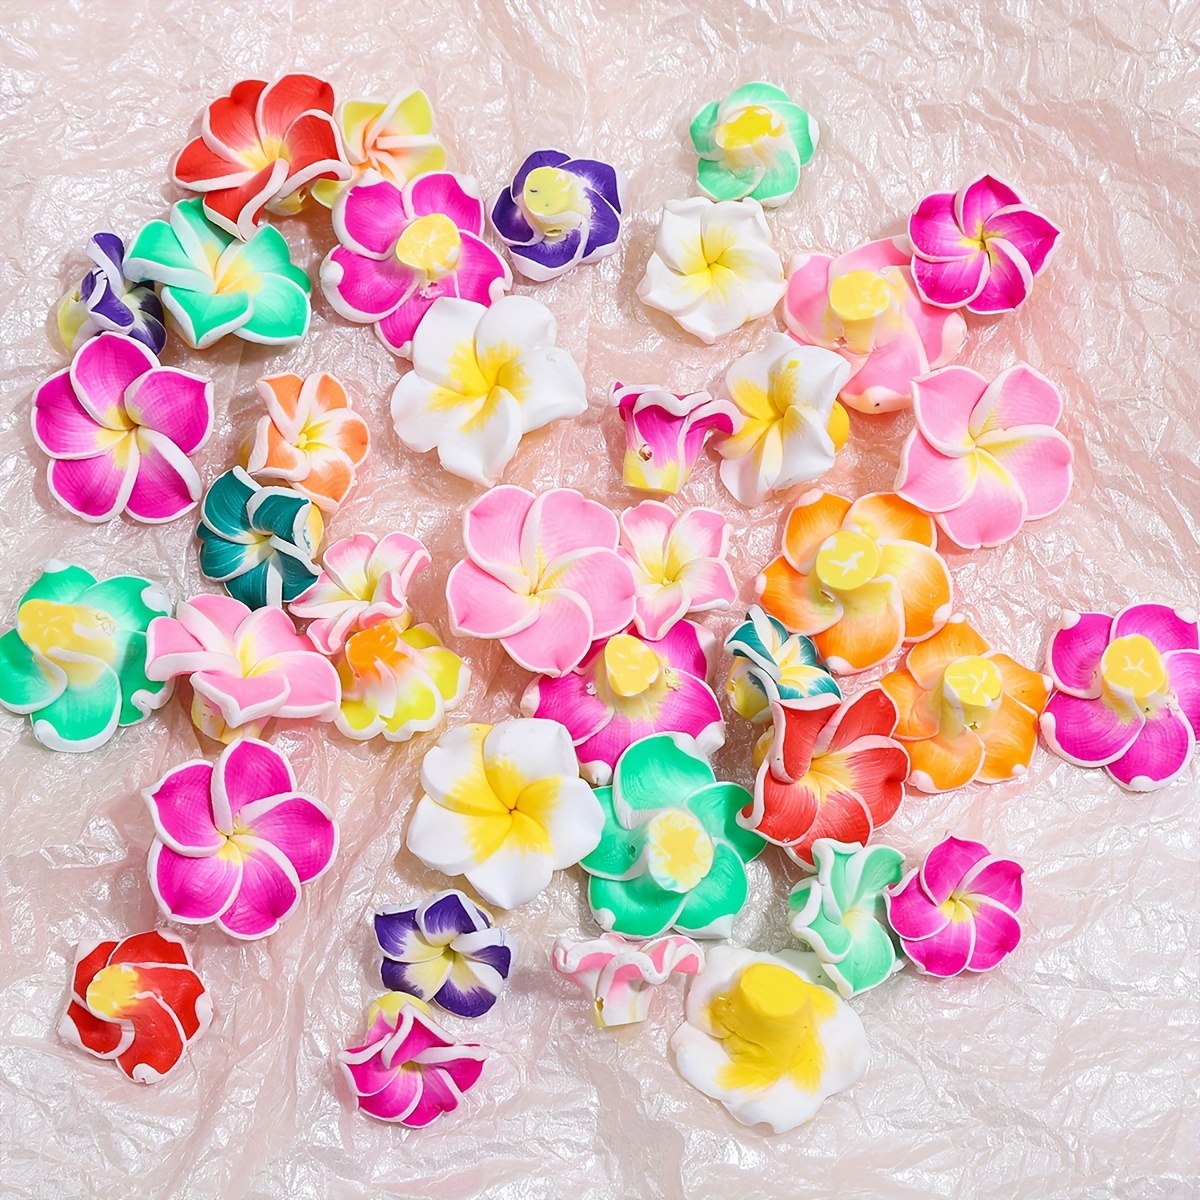 

10 Pcs Artificial Flower Polymer Clay Beads, Plumeria Flower Spacer Loose Charm Beads With Hole, For Jewelry Earring Making